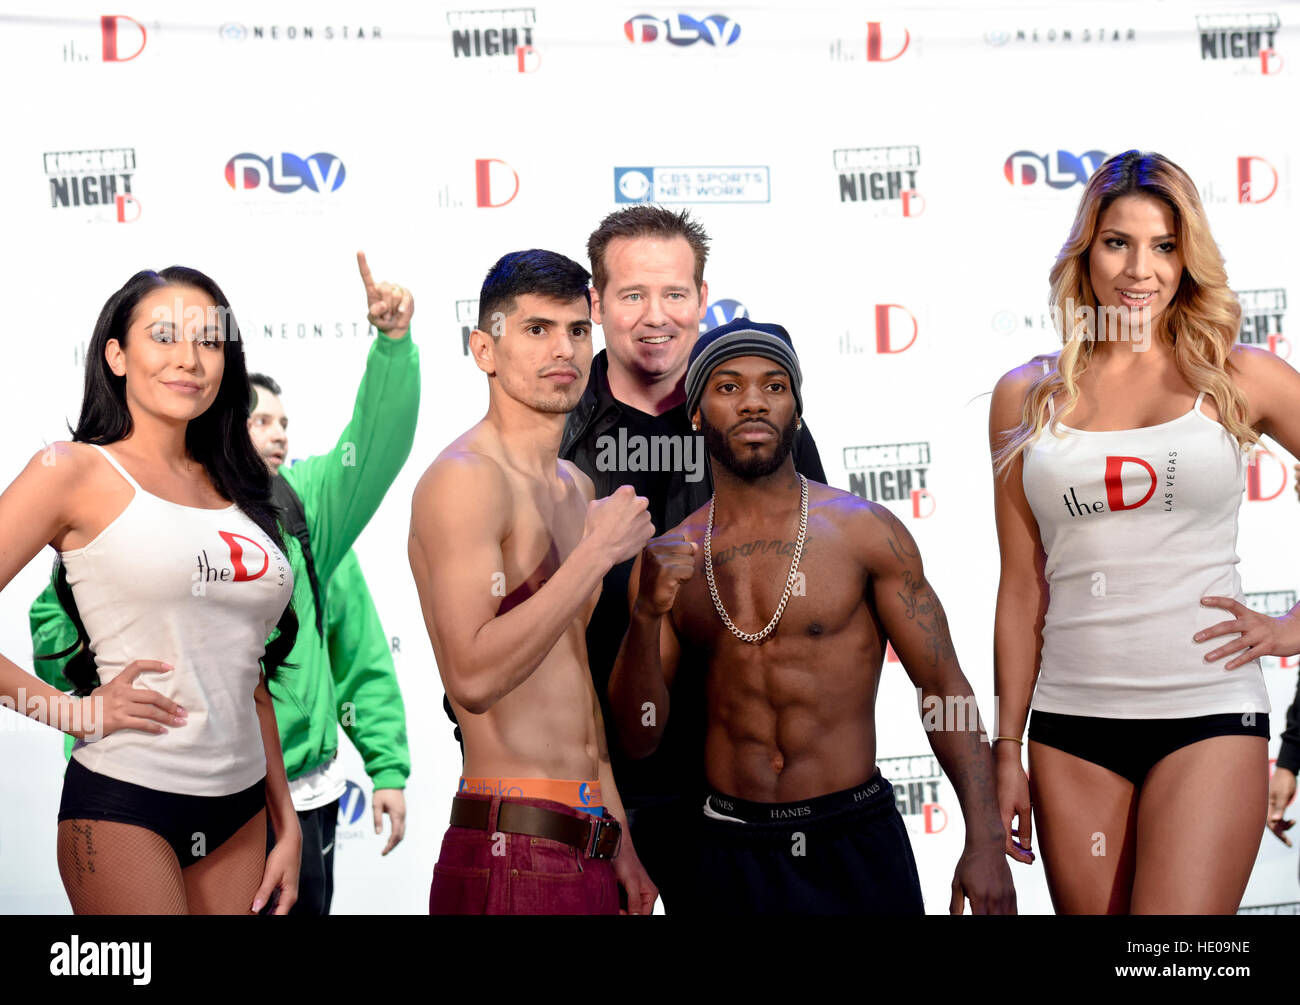 Las Vegas, Nevada December 16, 2016 -   Fighters weigh-in for “Knockout Night at the D”  presented by the D Las Vegas and DLVEC and promoted by Roy Jones Jr. Stock Photo